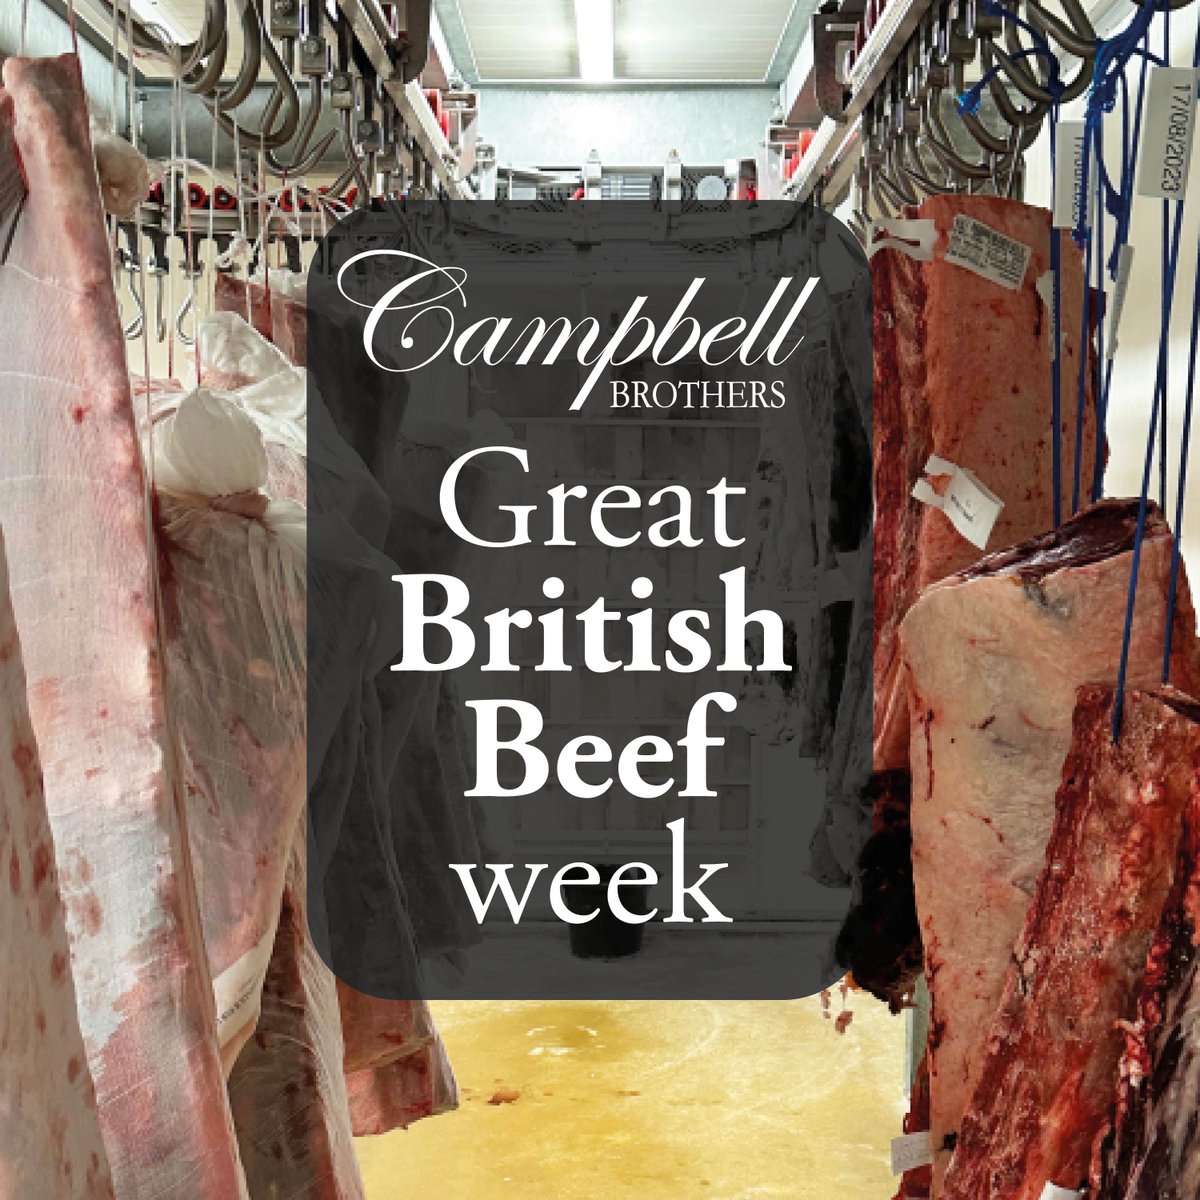 It’s no secret that our CB Reserve is special 👌

But did you know that our premium British beef is dry-aged in our very own Himalayan salt chambers at our depots?

#GreatBritishBeefWeek